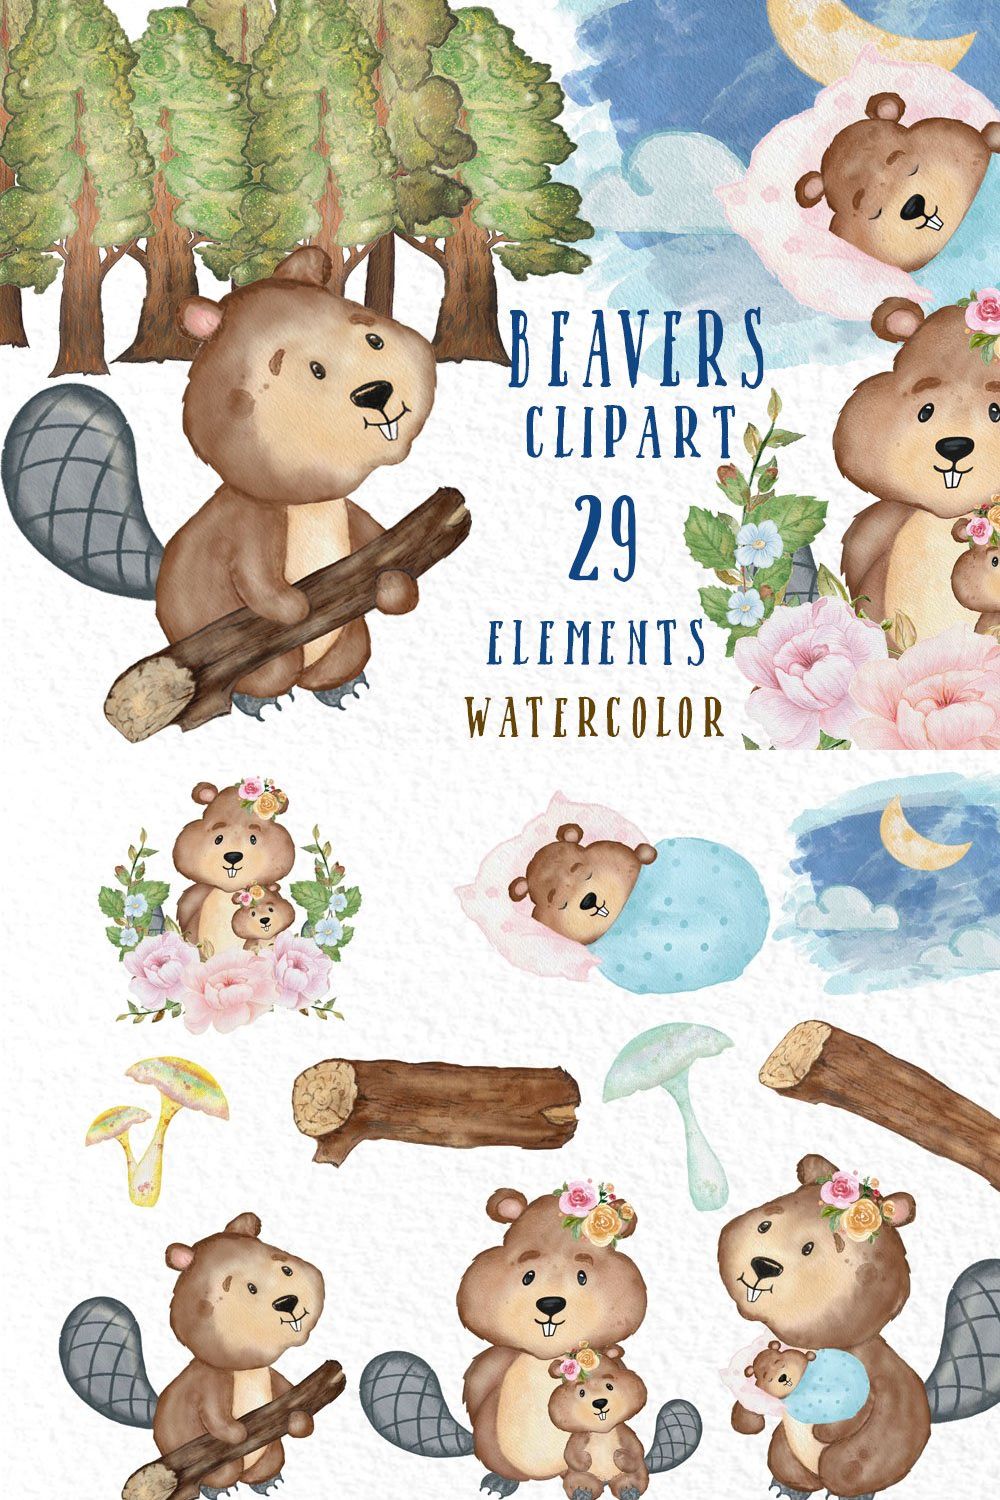 Beaver clipart Cute forest animals pinterest preview image.